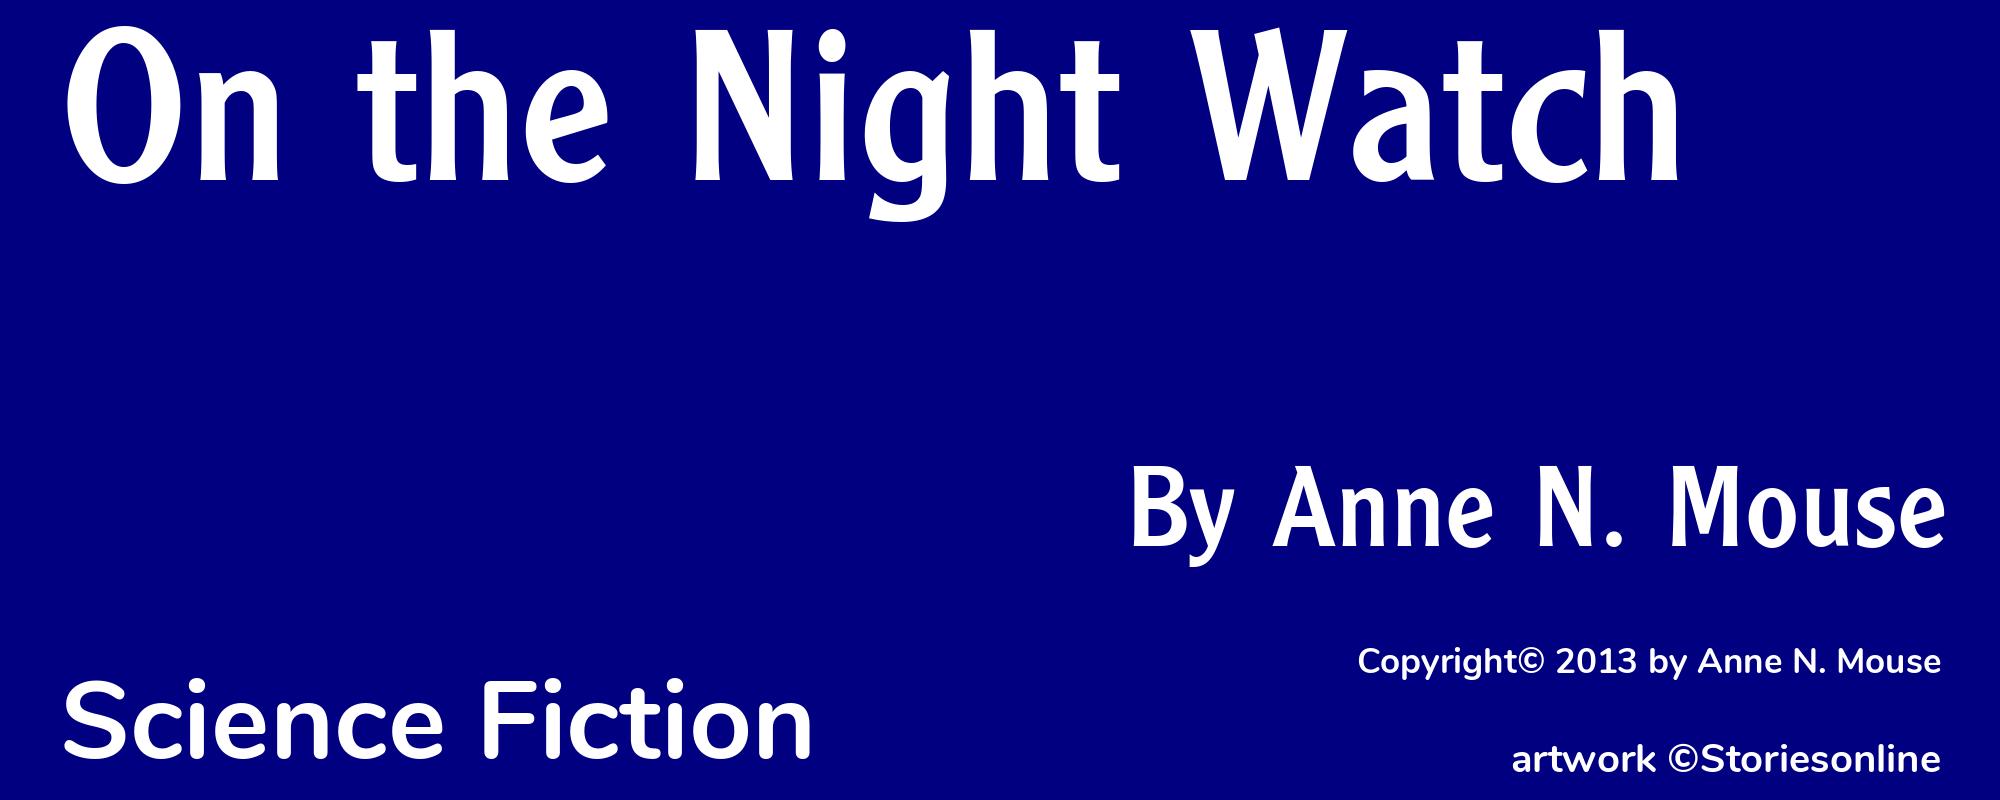 On the Night Watch - Cover